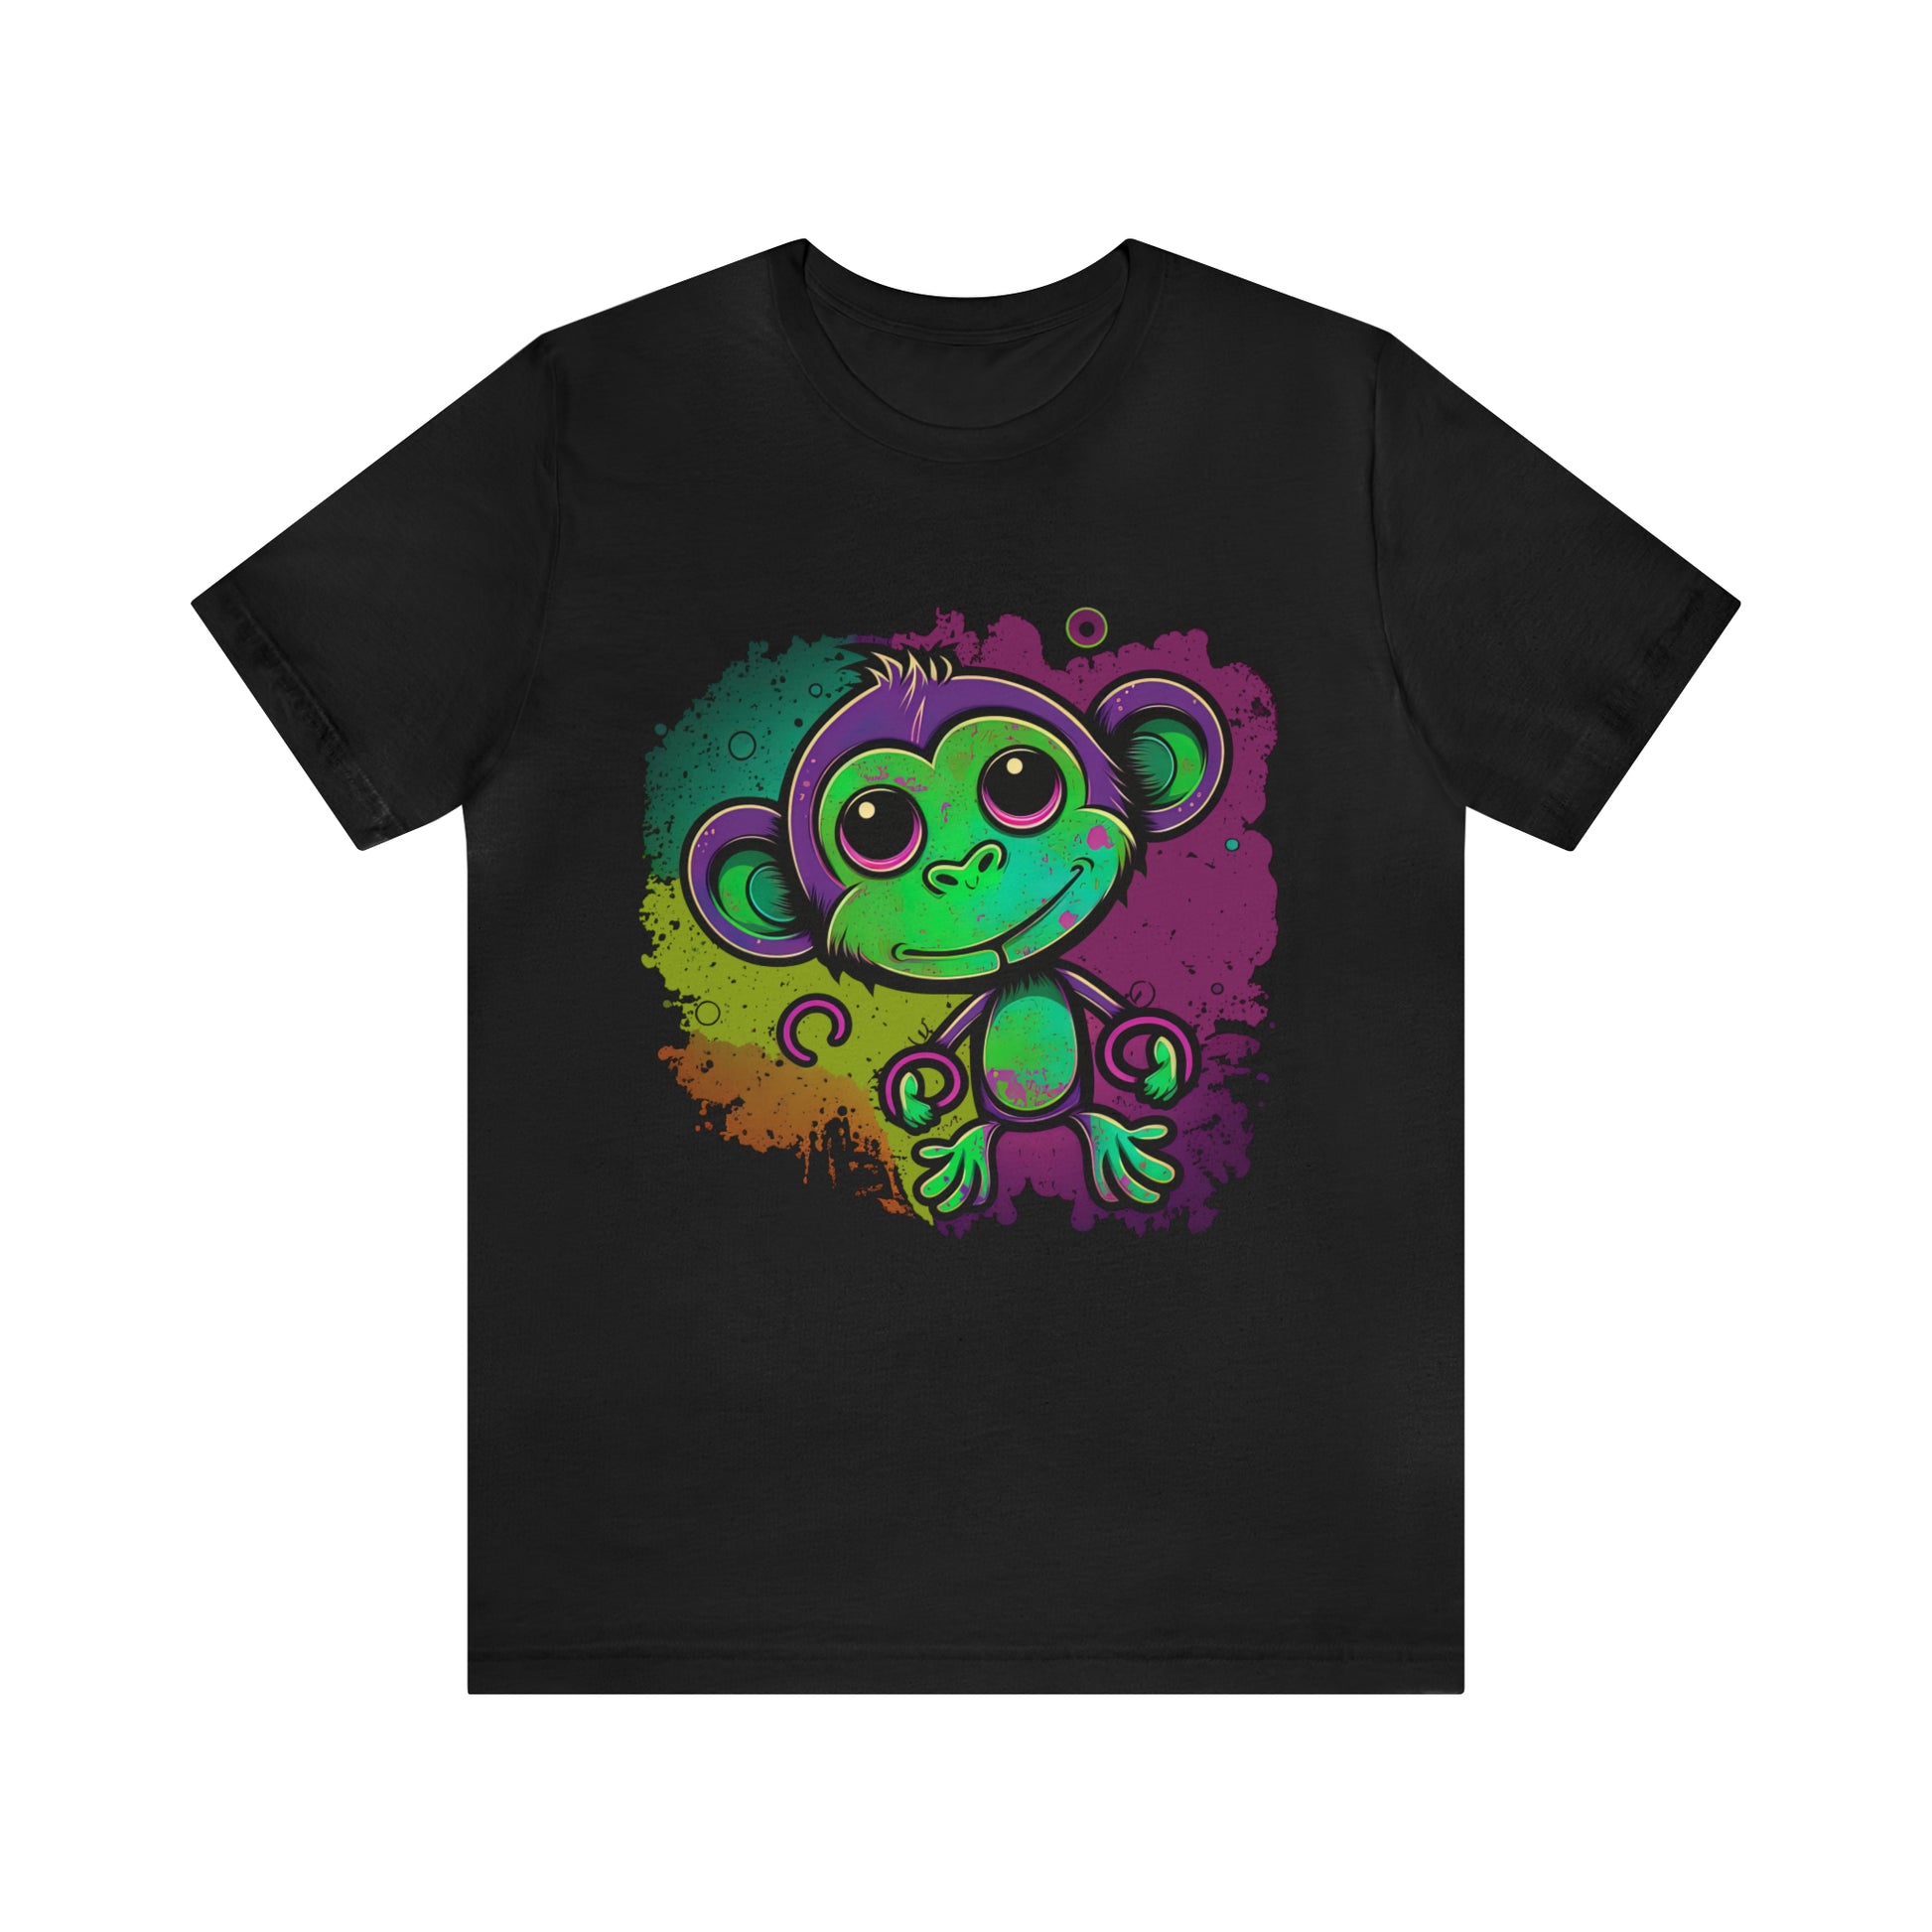 psychedelicBRANDz's Vibrant Forest Frolic featuring a monkey in a psychedelic design on a black shirt